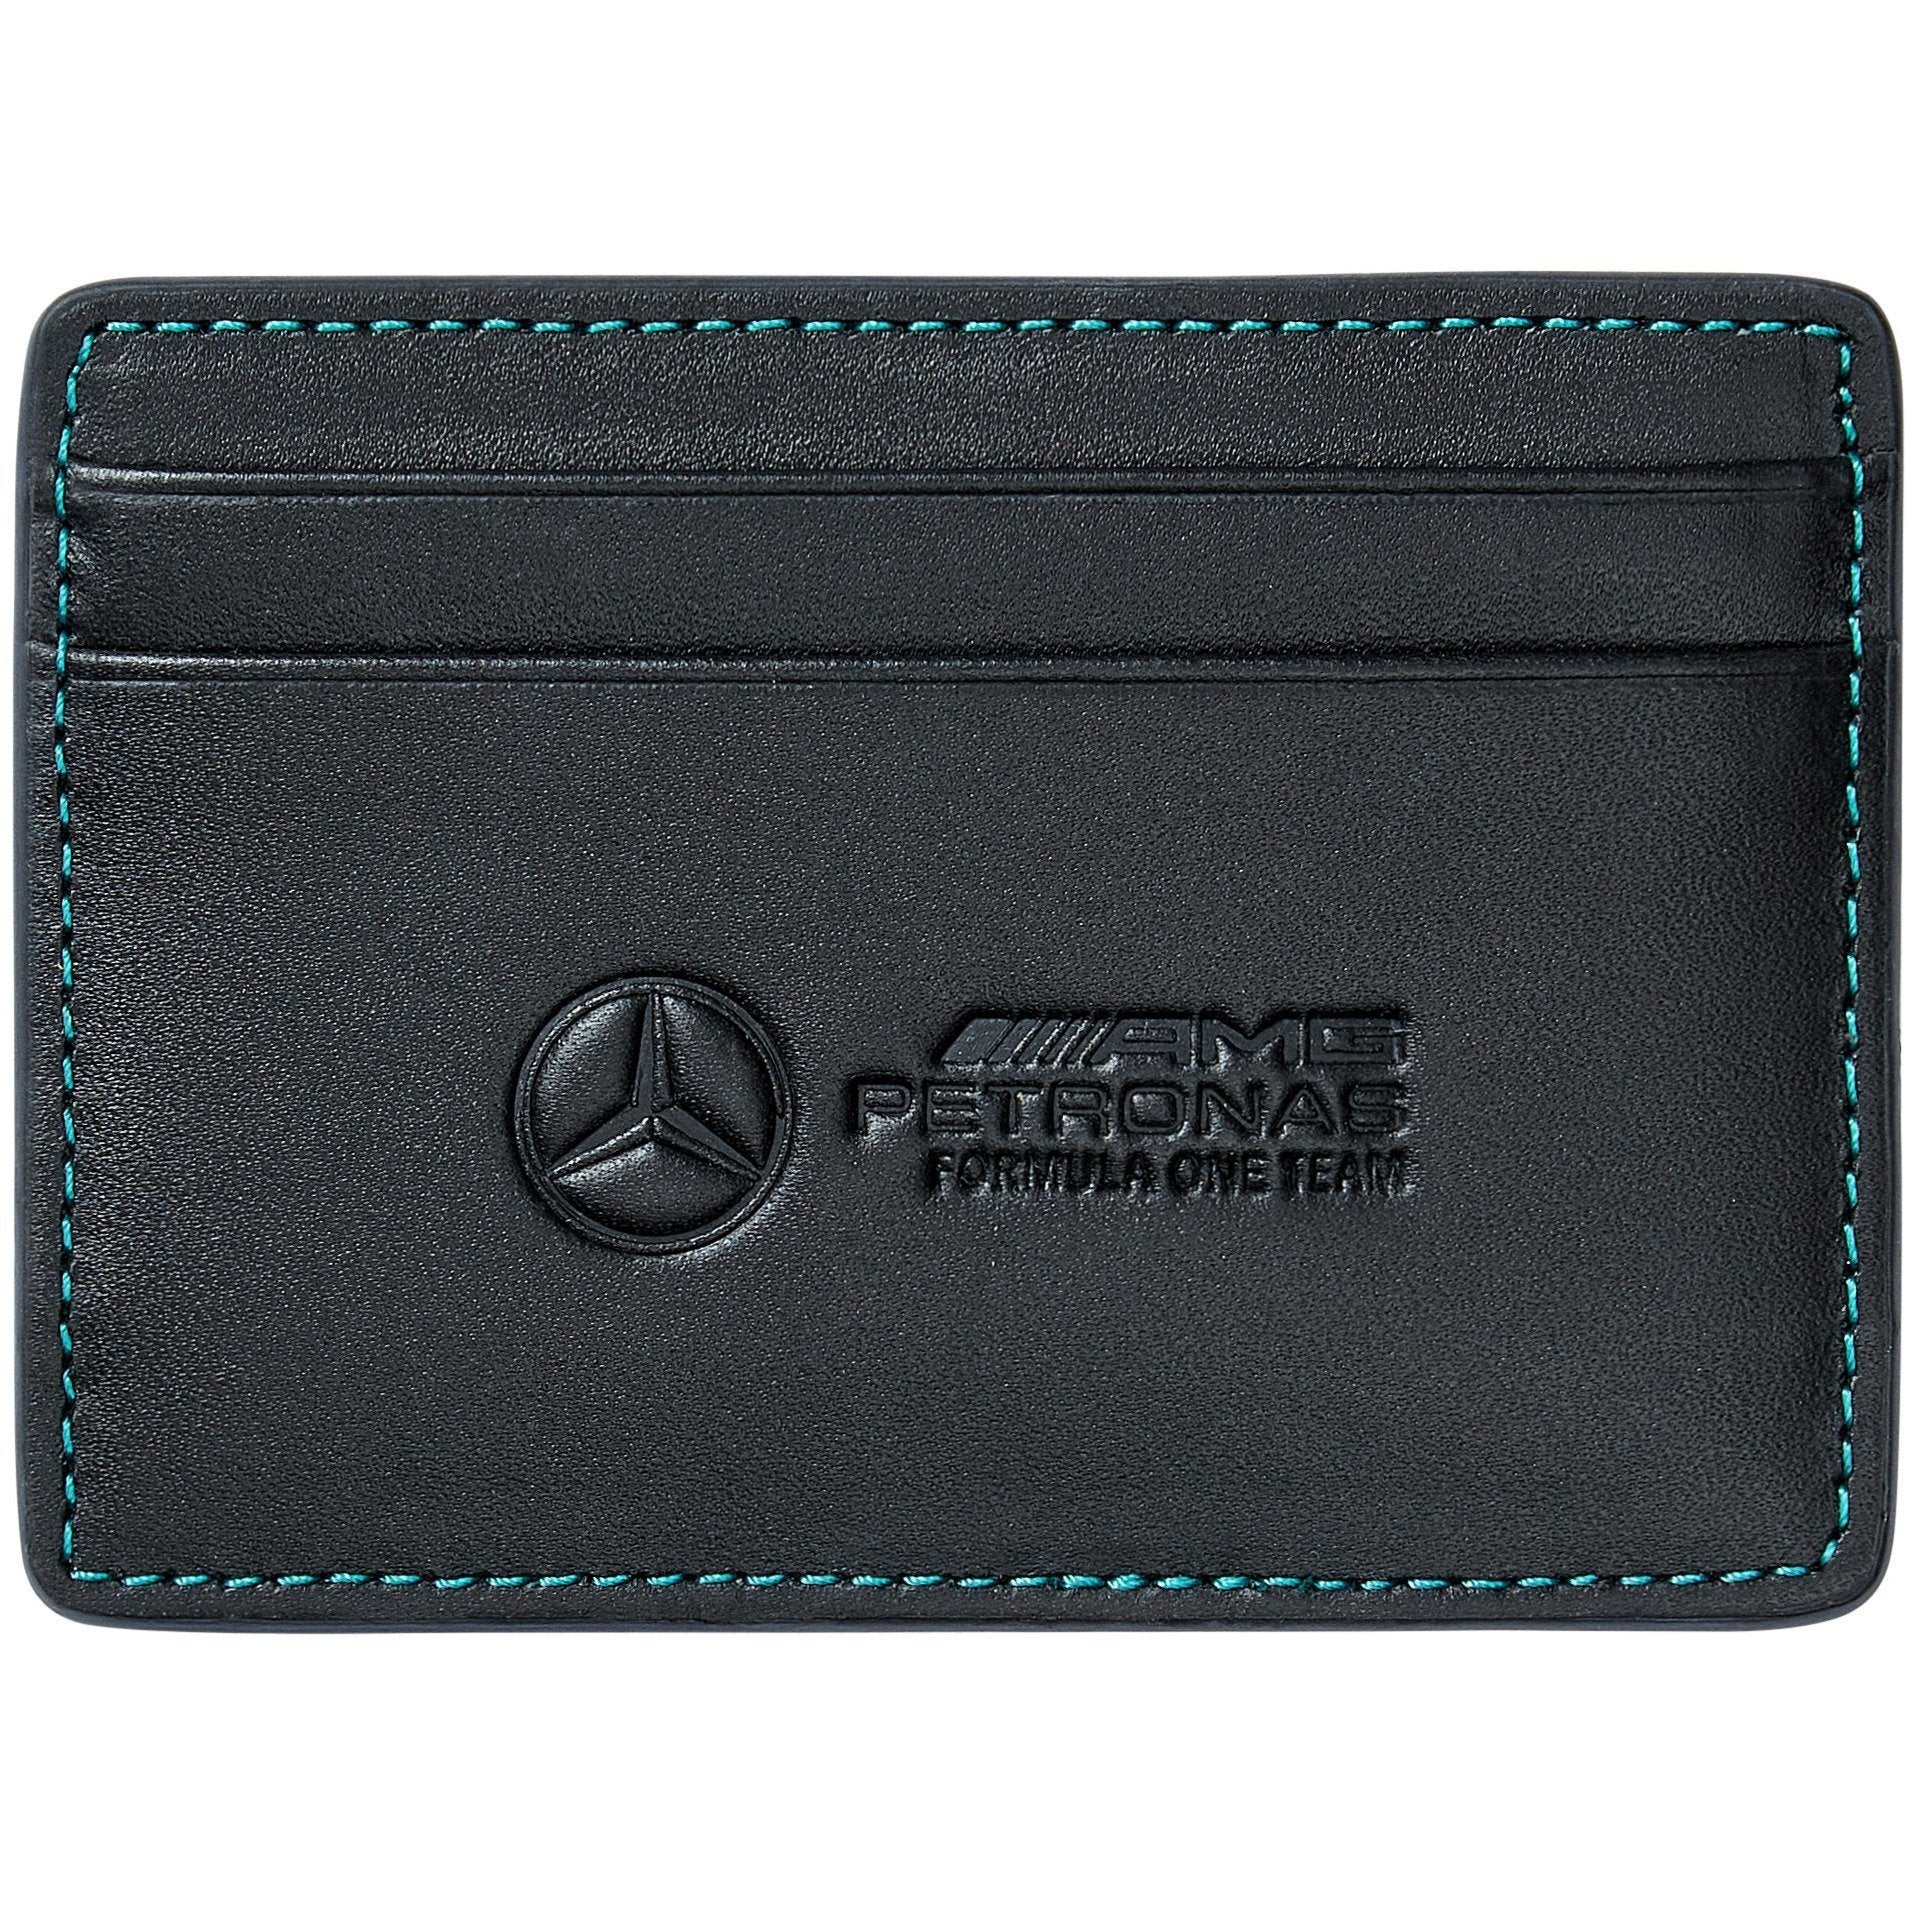 Wallet Card Mercedes Benz AMG by zcull77